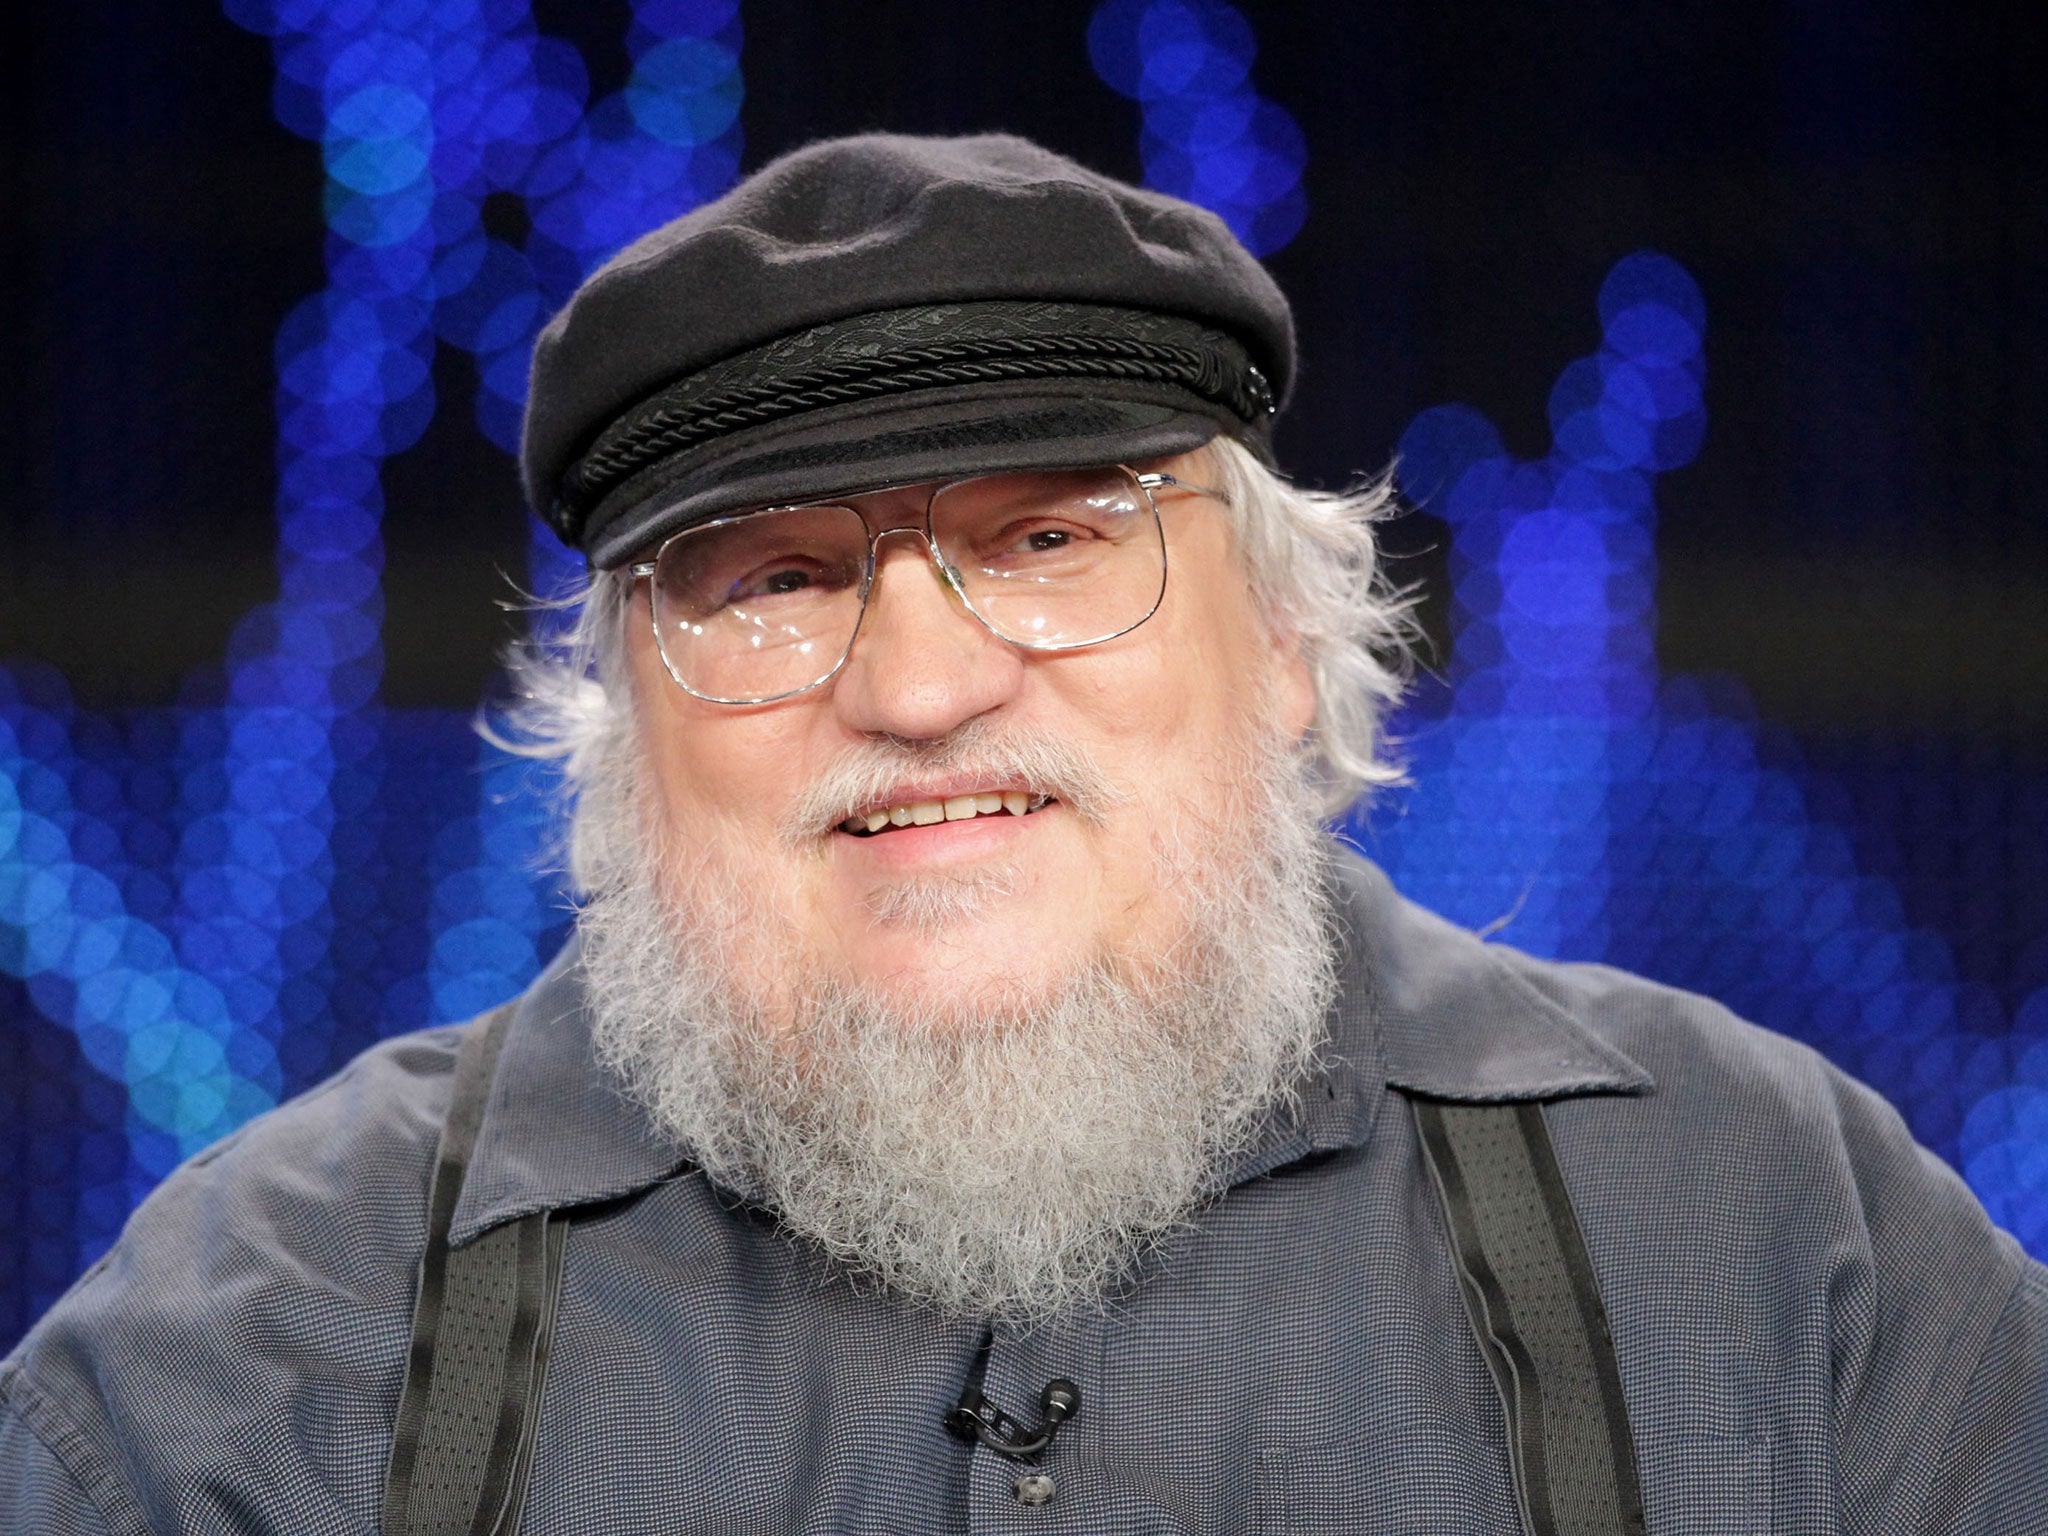 George RR Martin's A Song of Ice and Fire novels are the basis for HBO's Game of Thrones